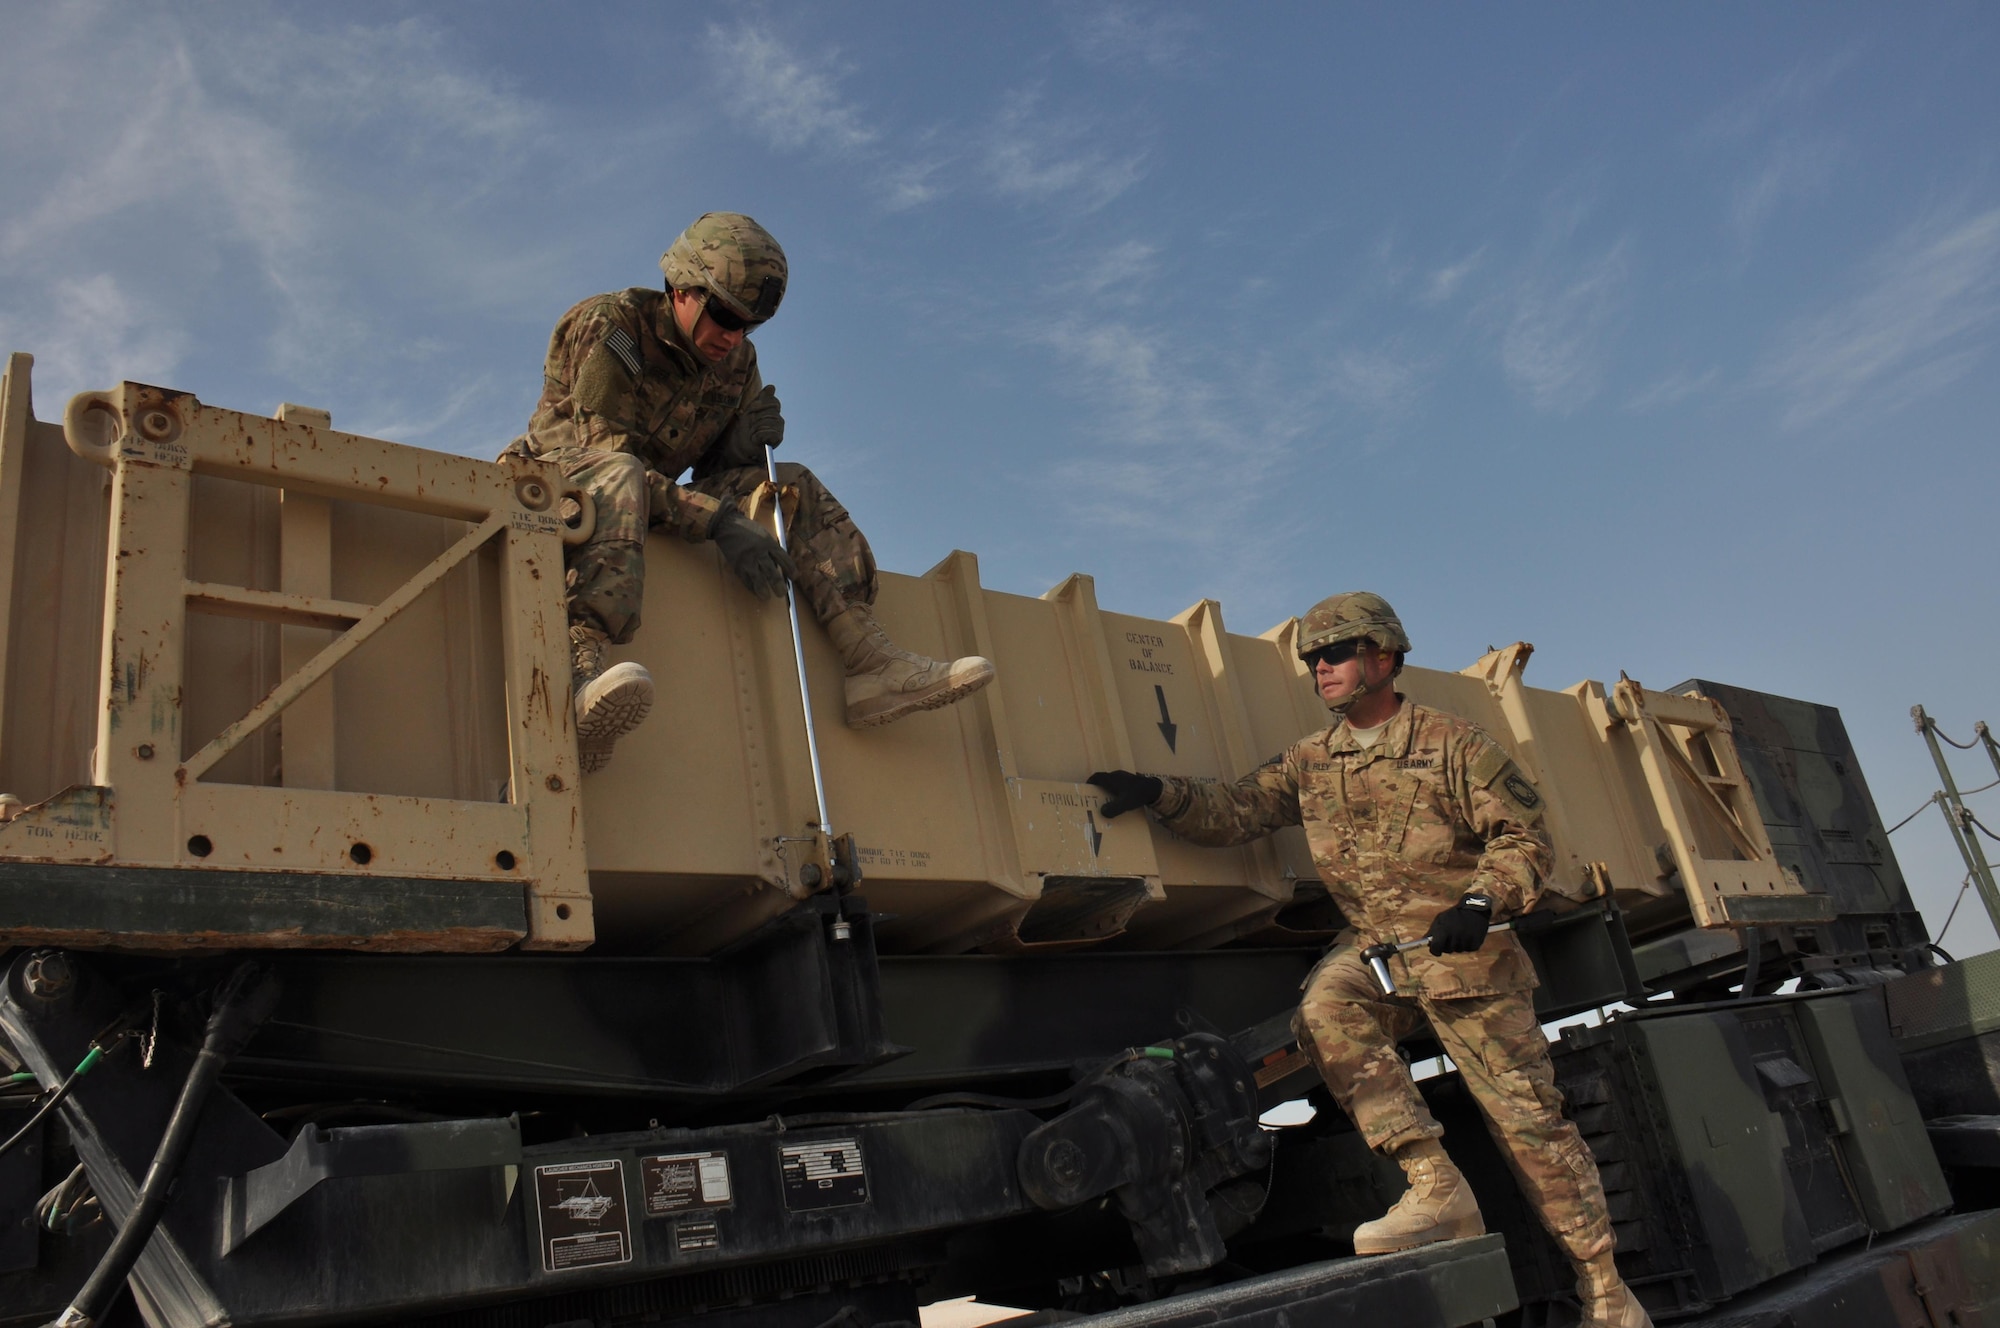 Pfc. Kelson Weber (Left), from Waukesha, Wisconsin and Sgt. Clinton Riley (Right) from Tupelo, Mississippi, both 1-62 Delta Battery Air Defense Artillery Regiment Patriot station launcher operators and maintainers, prepare a PAC-2 missile canister to be offloaded during a training exercise at Al Udeid Air Base, Qatar Mar. 4. The Patriot missiles at AUAB protect the base from a variety of airborne threats including tactical ballistic missiles and drones.  (U.S. Air Force photo by Tech. Sgt. James Hodgman/Released)